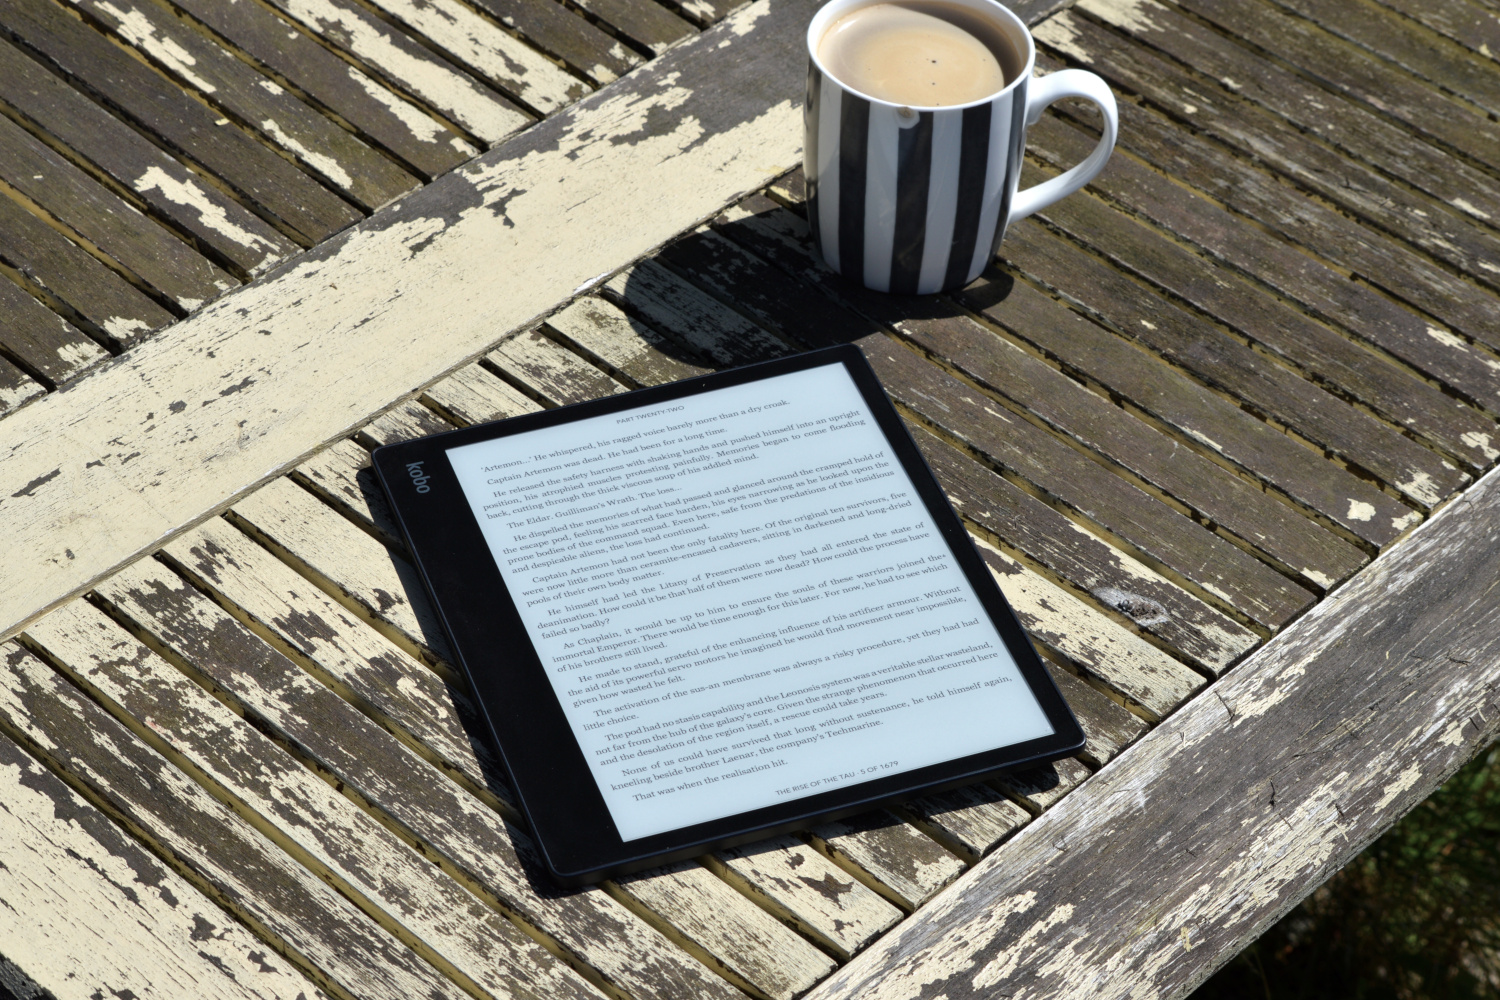 The Kobo Elipsa 2E laid outside on a table in the sun.